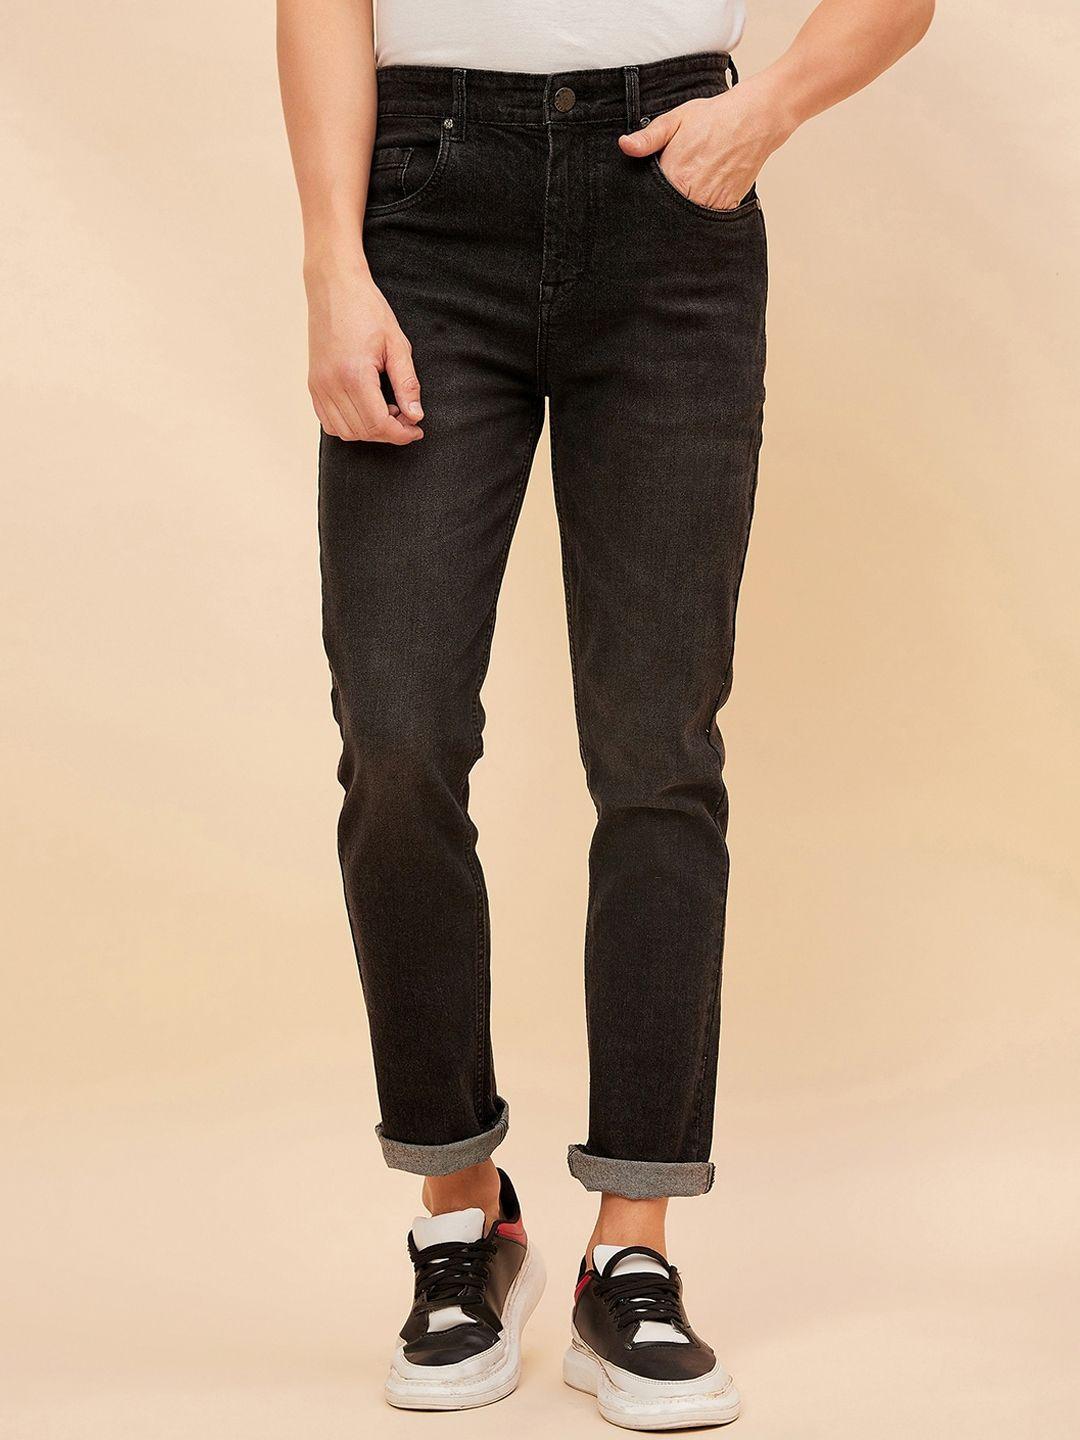 high-star-men-straight-fit-light-fade-stretchable-jeans